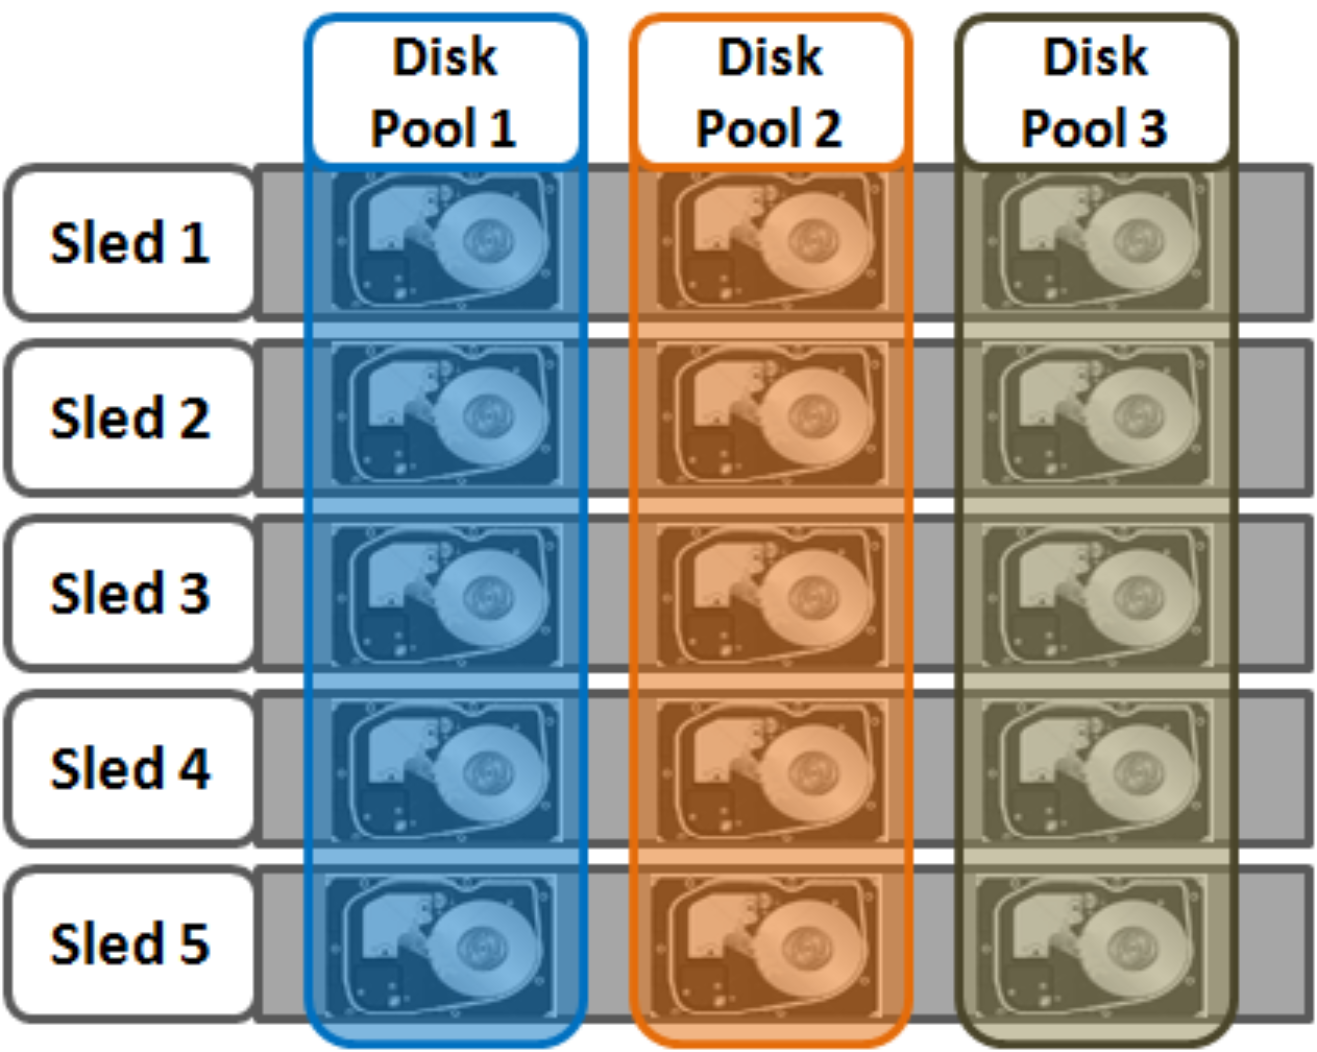 Graphic depicting disk pools within a modular chassis-based node.